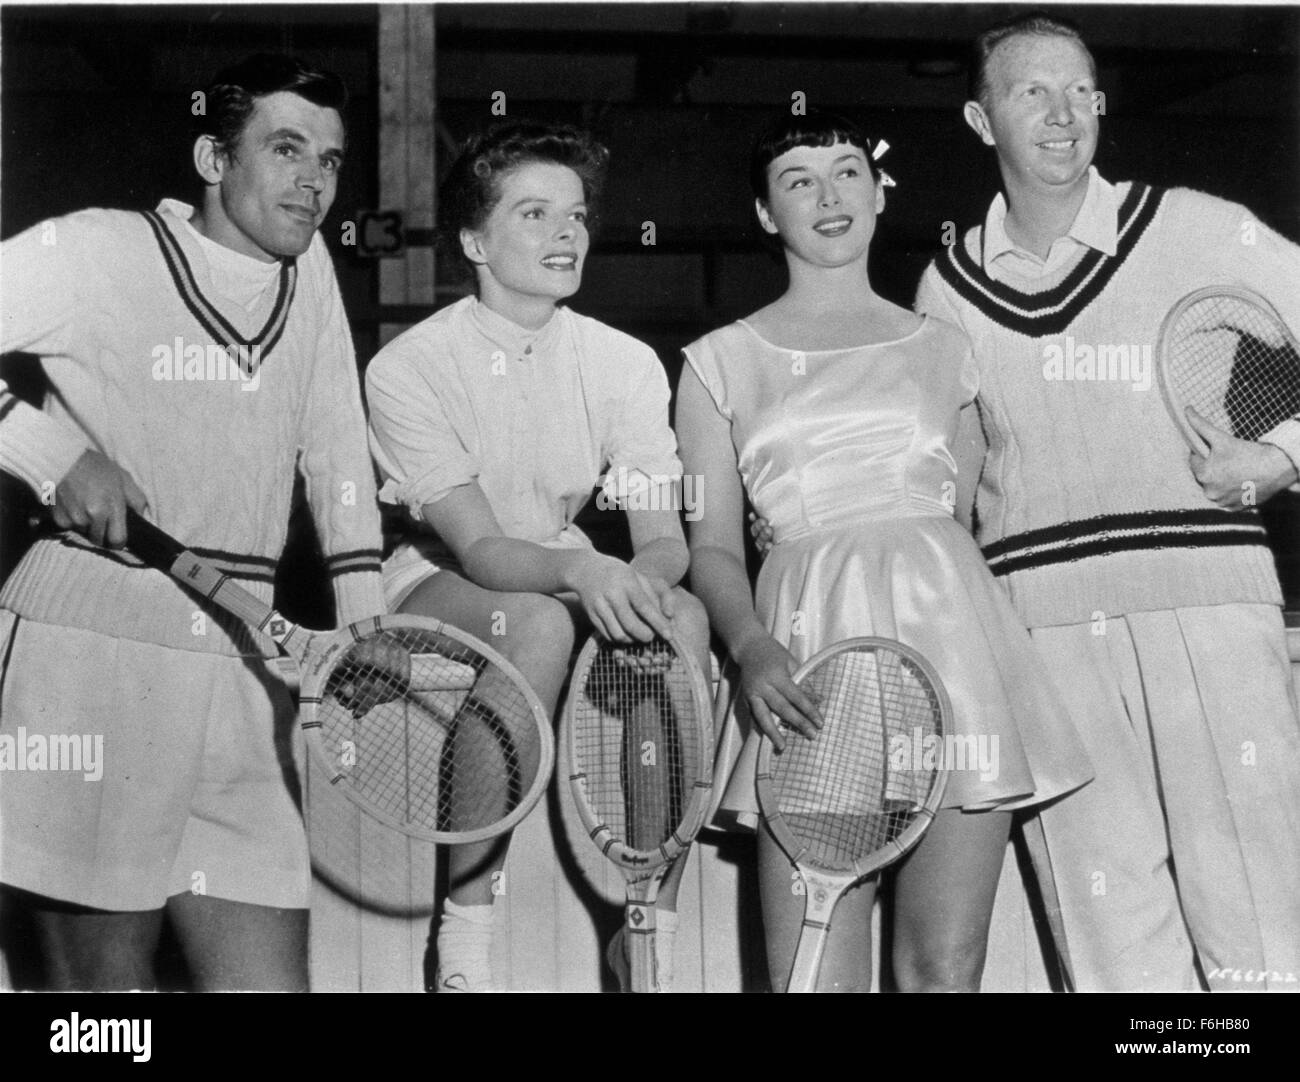 1952, Film Title: PAT AND MIKE, Director: GEORGE CUKOR, Studio: MGM, Pictured: DON BUDGE, CLOTHING, GEORGE CUKOR, KATHARINE HEPBURN, GUSSIE MORAN, MOVIE SET, FRANK PARKER, SPORT, TENNIS, RECREATION, SPORT SKIRT, SITTING, V NECK. (Credit Image: SNAP) Stock Photo